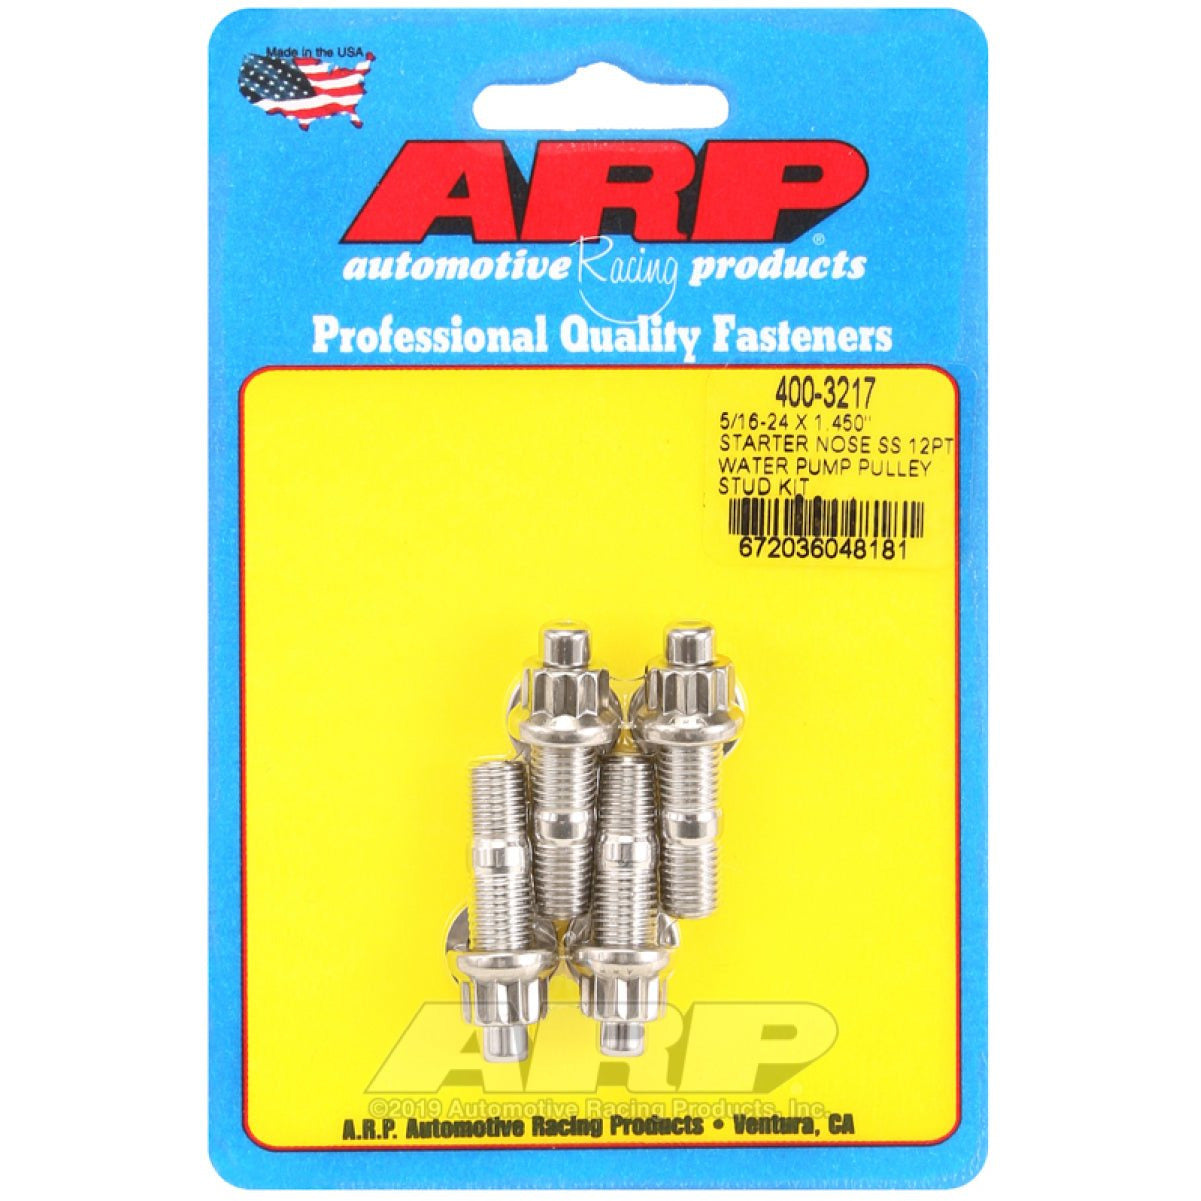 ARP 5/16-24 x 1.450 Starter Nose SS 12Pt Water Pump Pulley Stud Kit ARP Hardware Kits - Other